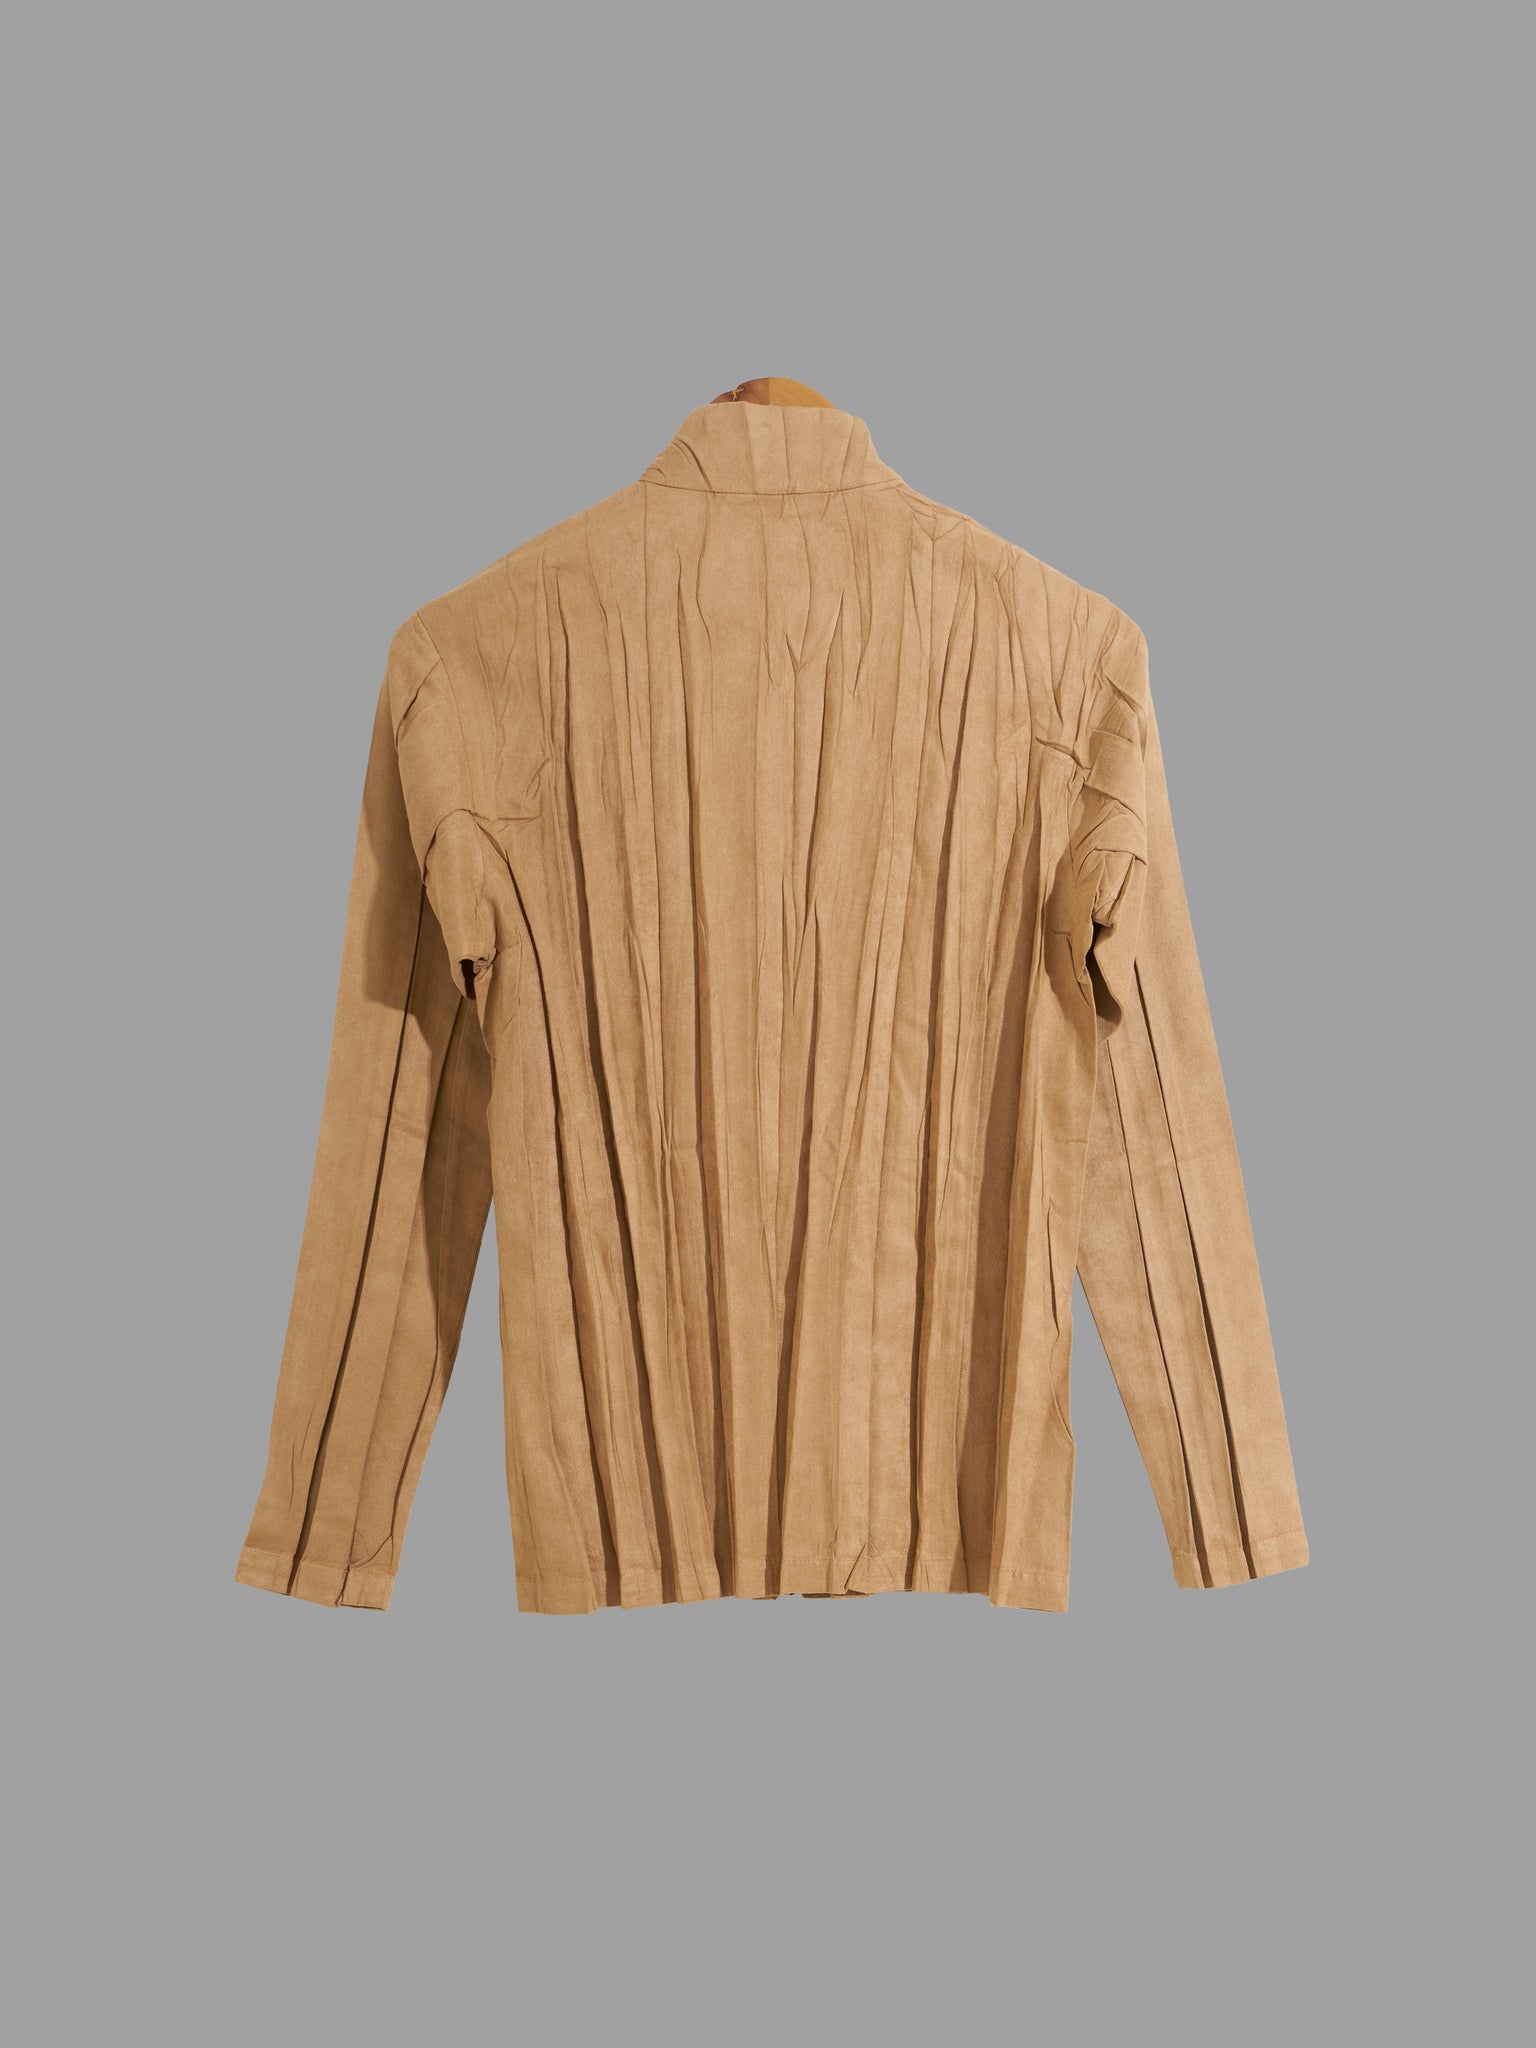 Issey Miyake beige creased polyester faux suede high neck zip jacket - size 2 M